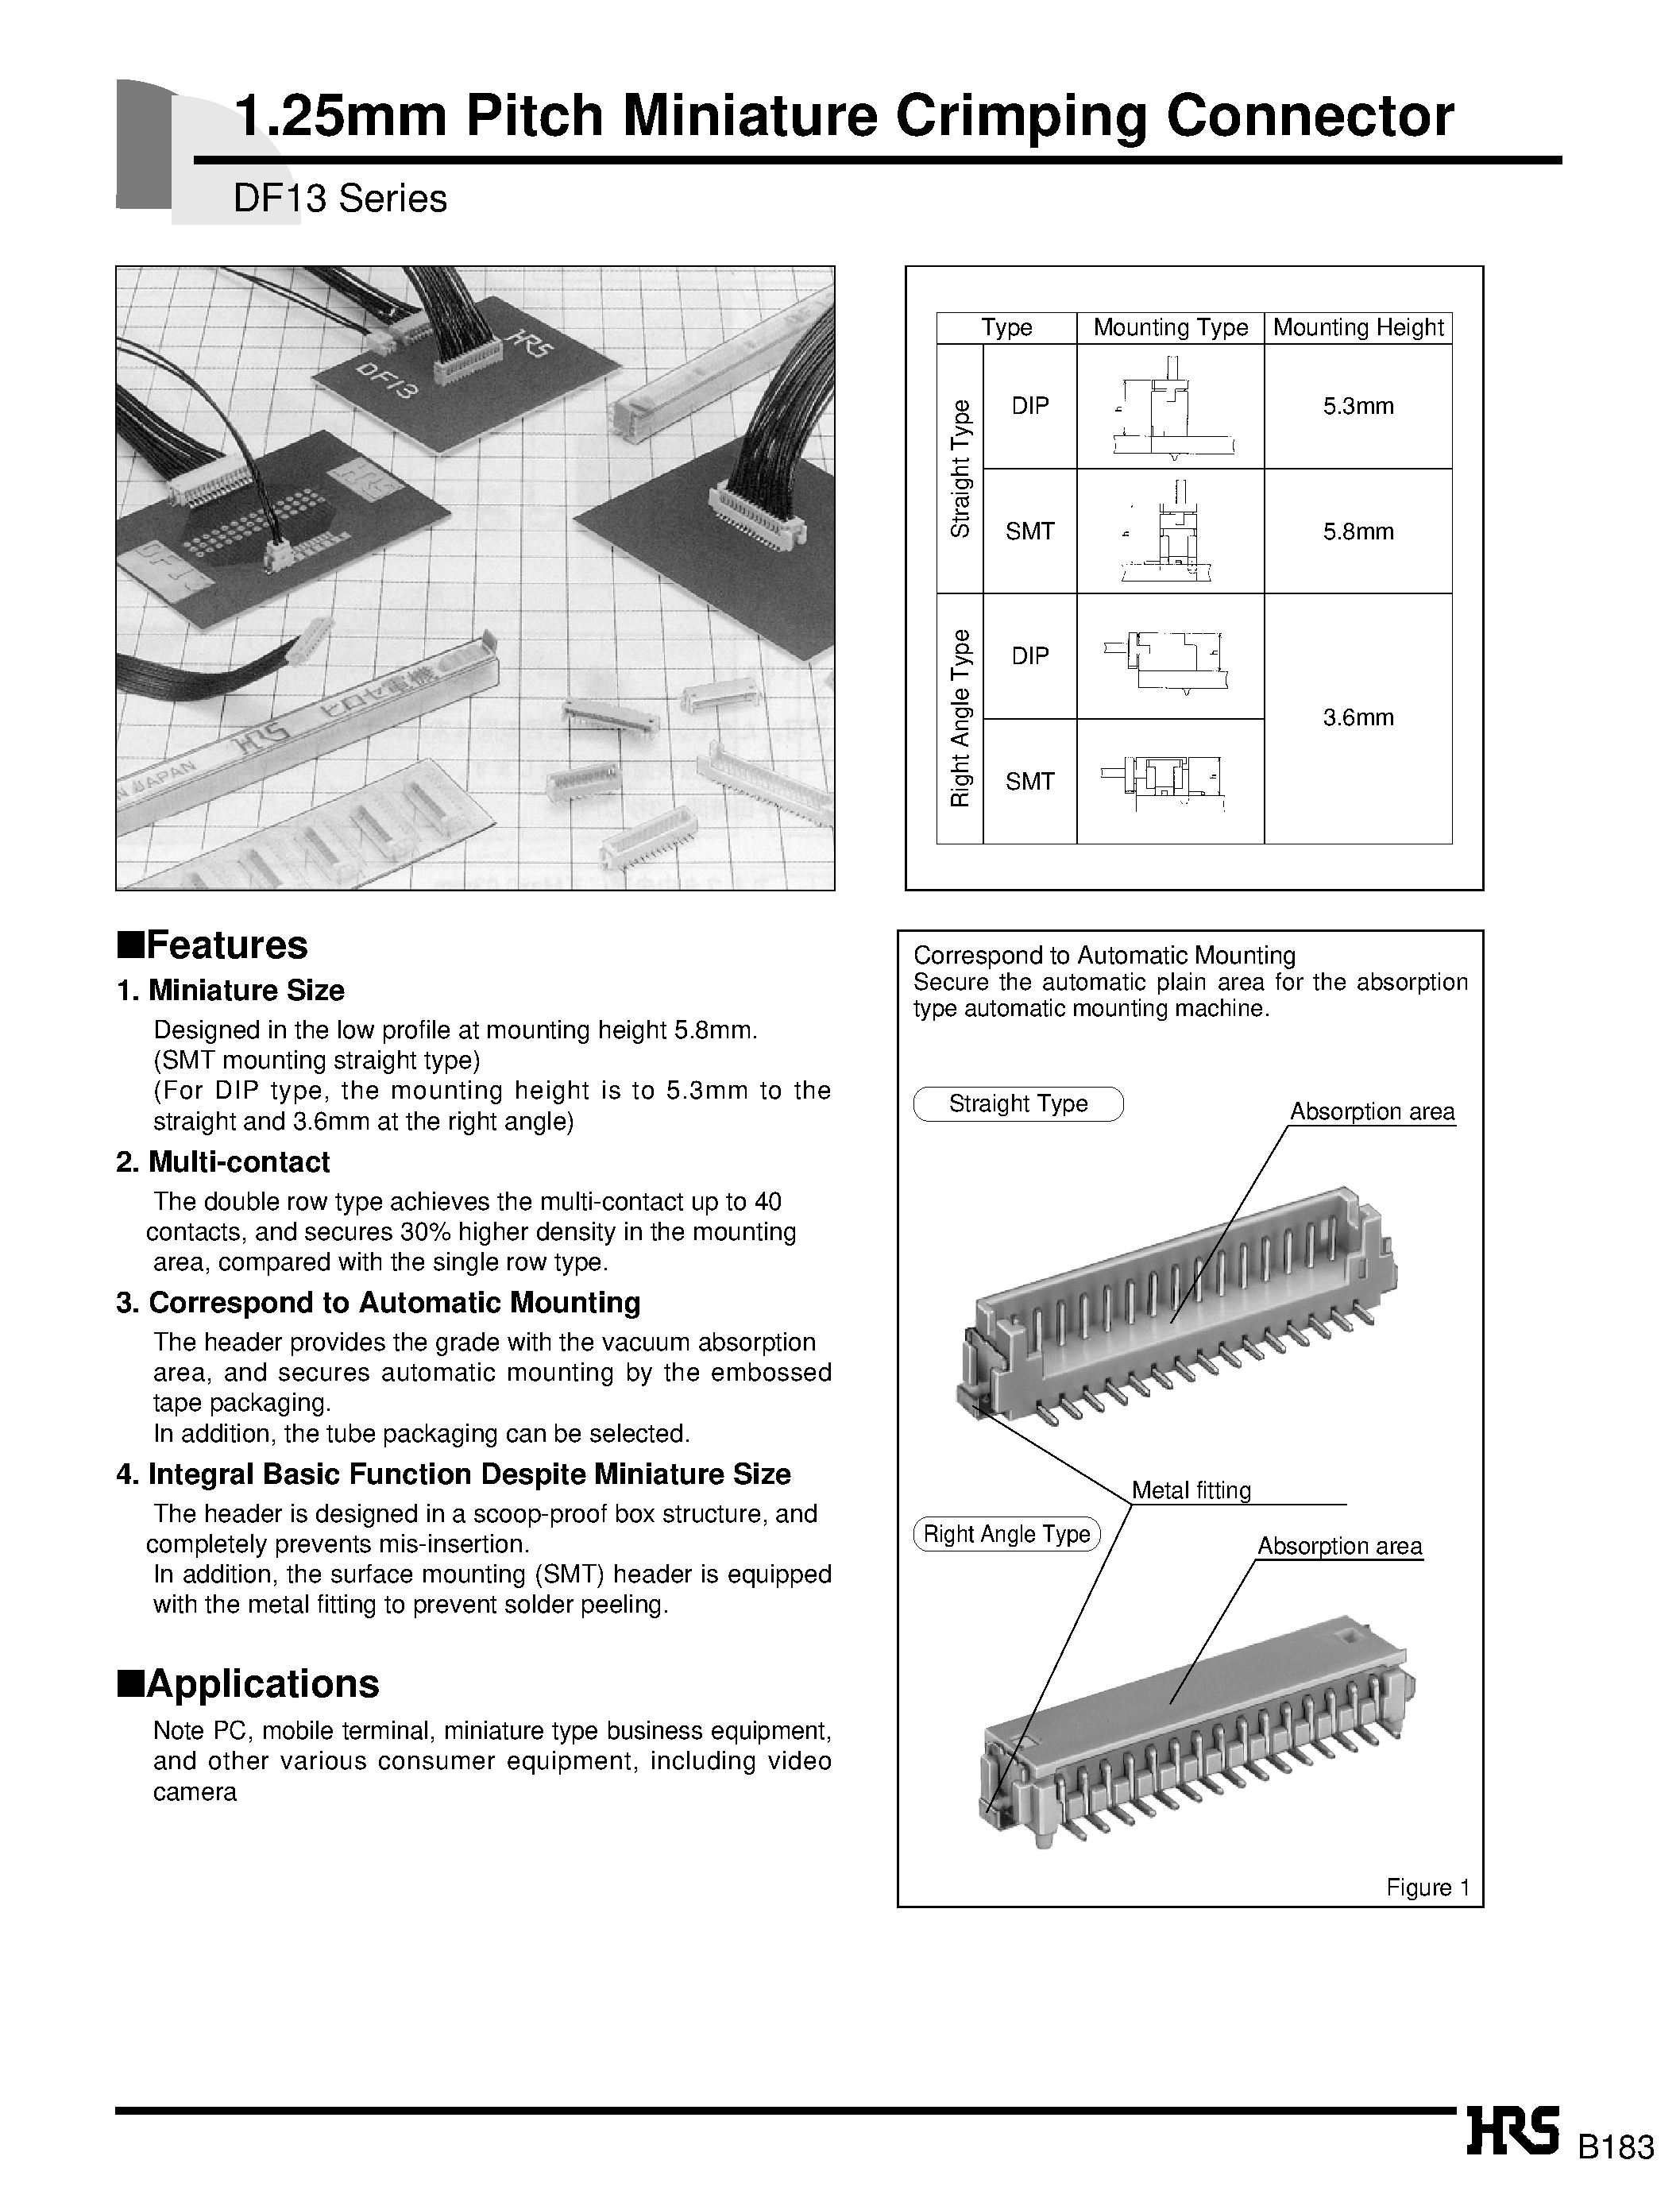 Datasheet DF13-10P-1.25DSA - 1.25mm Pitch Miniature Crimping Connector page 1